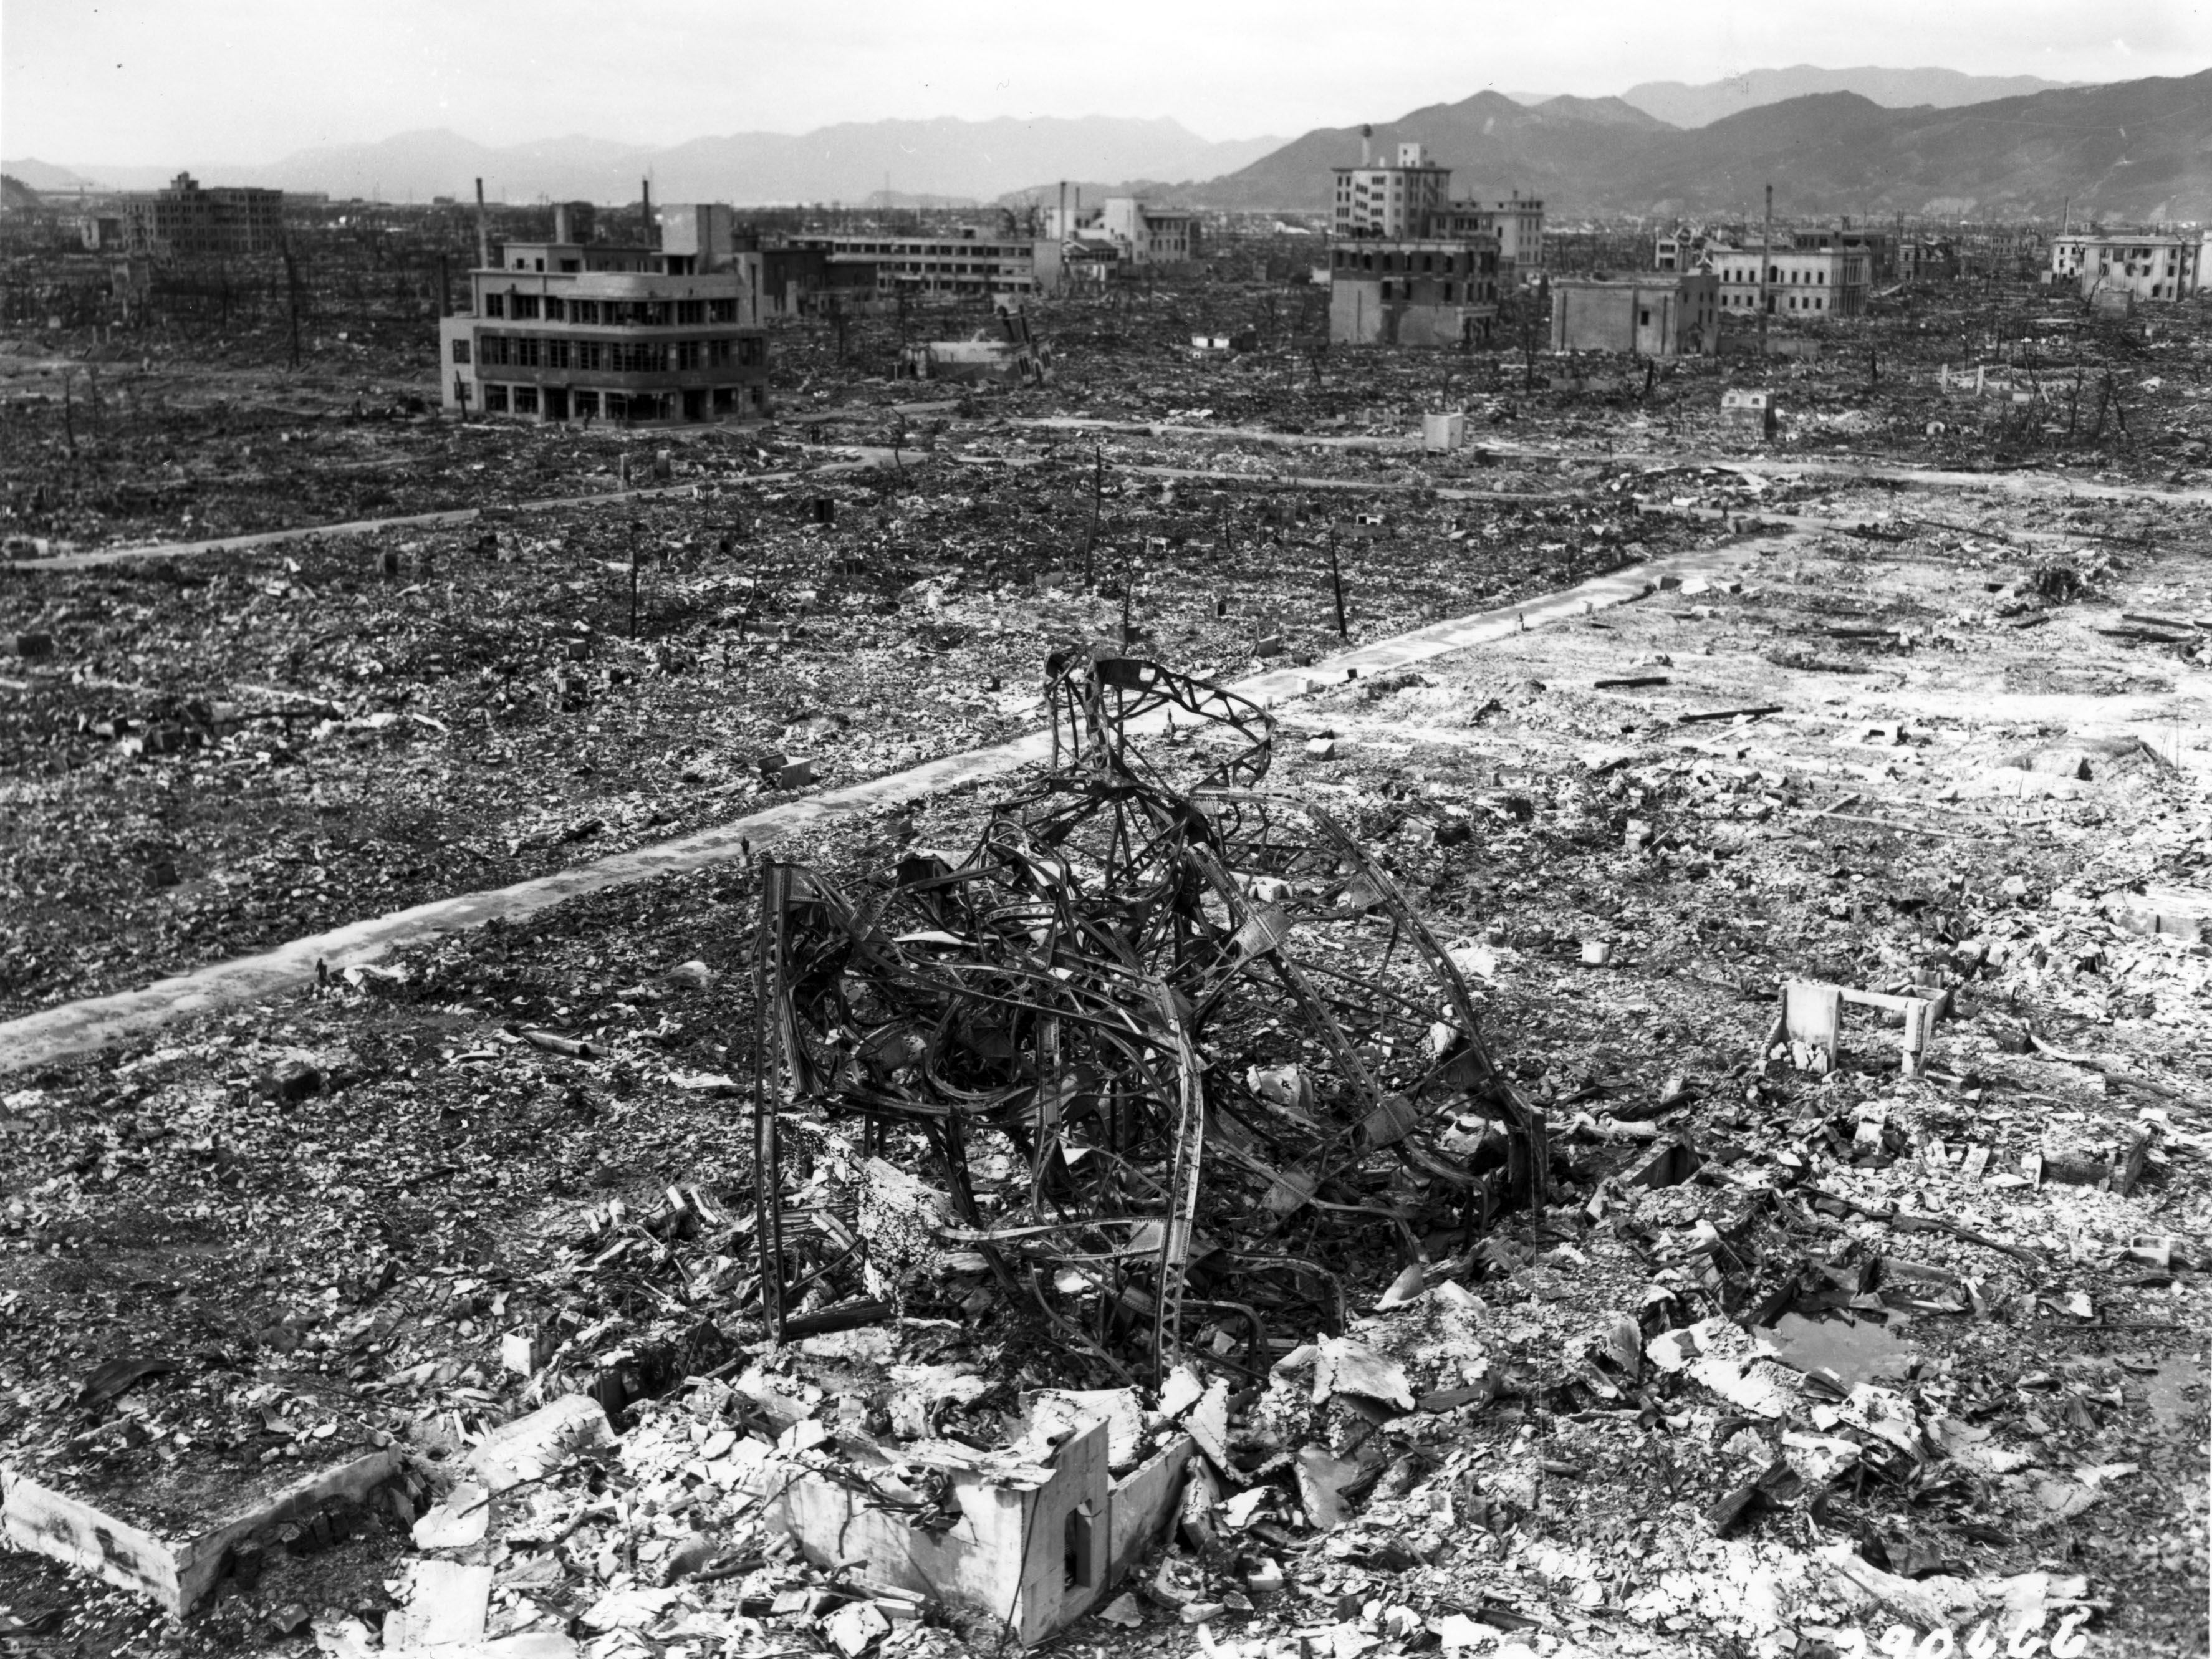 The aftermath of the bombing at Nagasaki in 1945. (MPI/Getty Images)